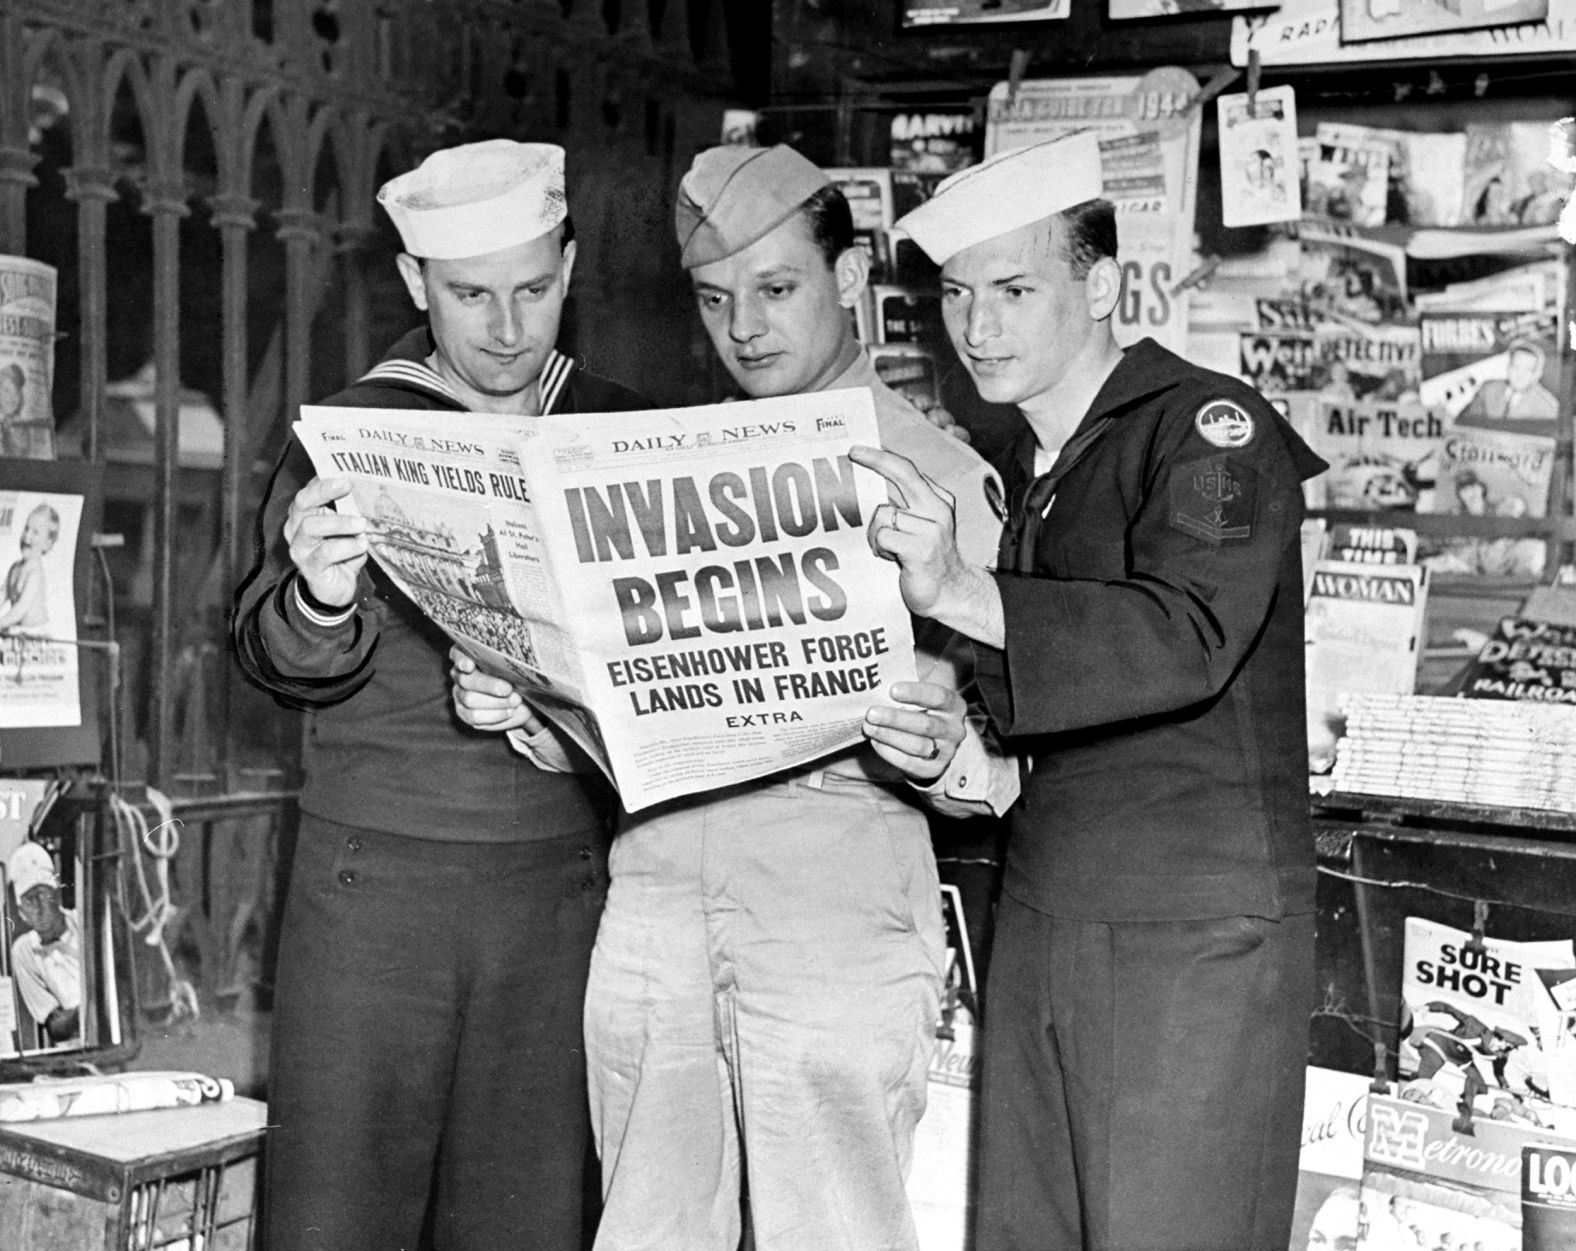 US servicemen in New York read news about the D-Day invasion. The operation was led by Gen. Dwight D. Eisenhower, who would later become president of the United States.